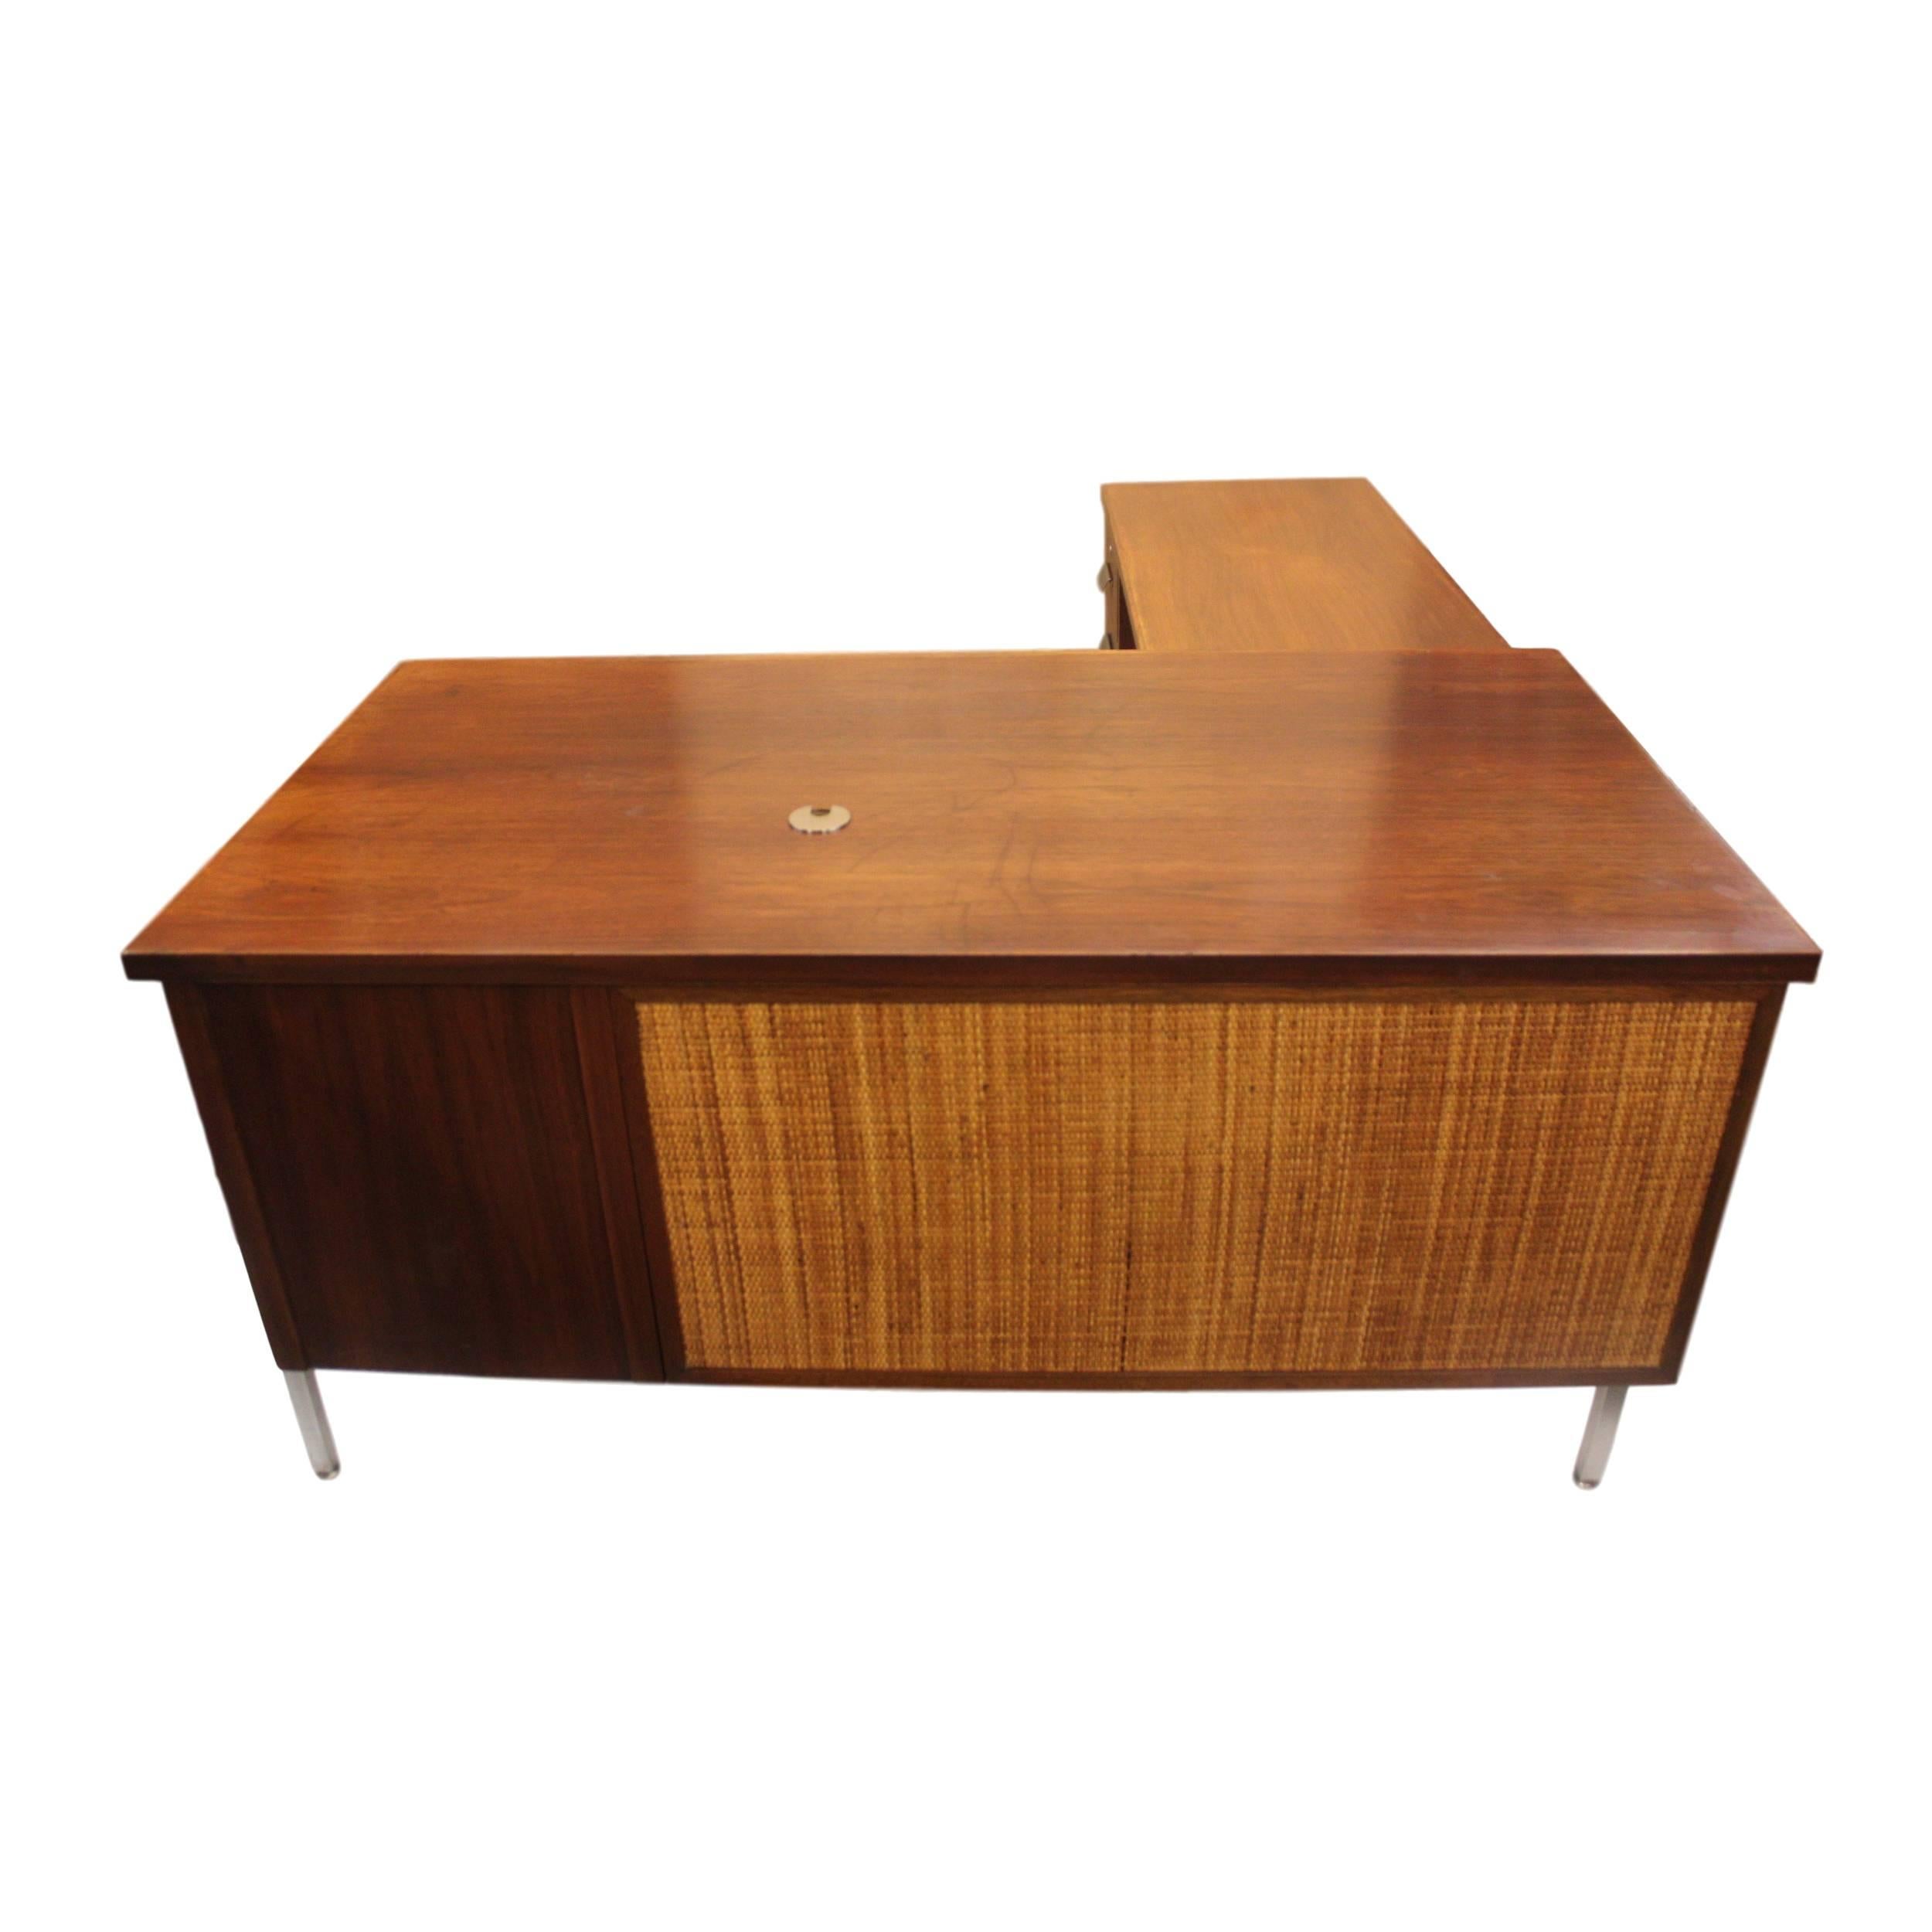 This desk is fresh from refurbishment and is in excellent overall condition. Walnut, chrome and cane combine with the gorgeous architectural lines to make this desk a real stand-out!

Desk features:

Walnut primary wood
Oak secondary